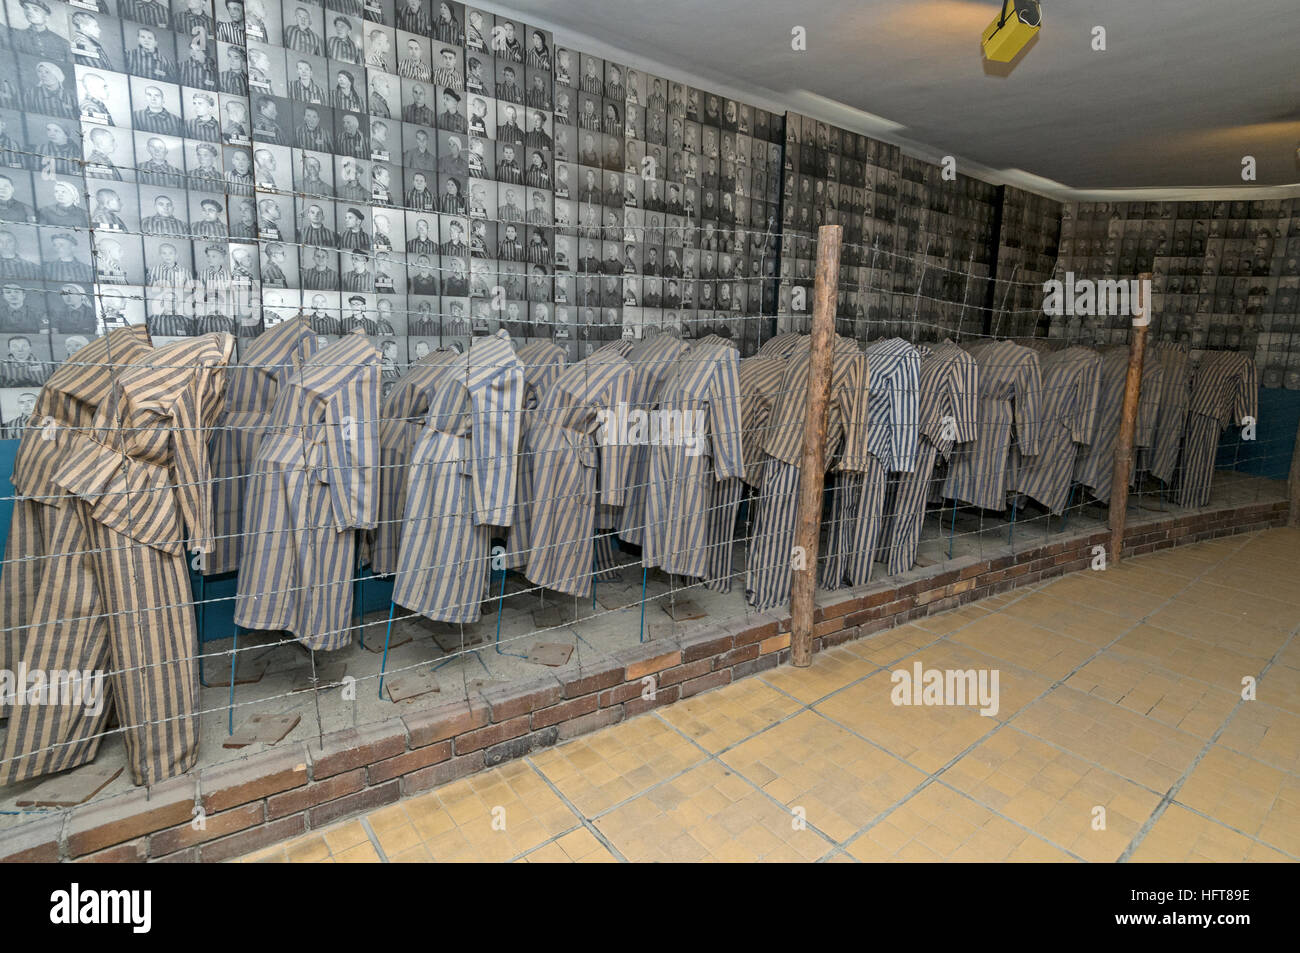 Many of the existing ex-prisoner accommodation blocks are now small museums at Auschwitz Birkenau Nazi concentration camp in Oswiecim, Poland.  The di Stock Photo